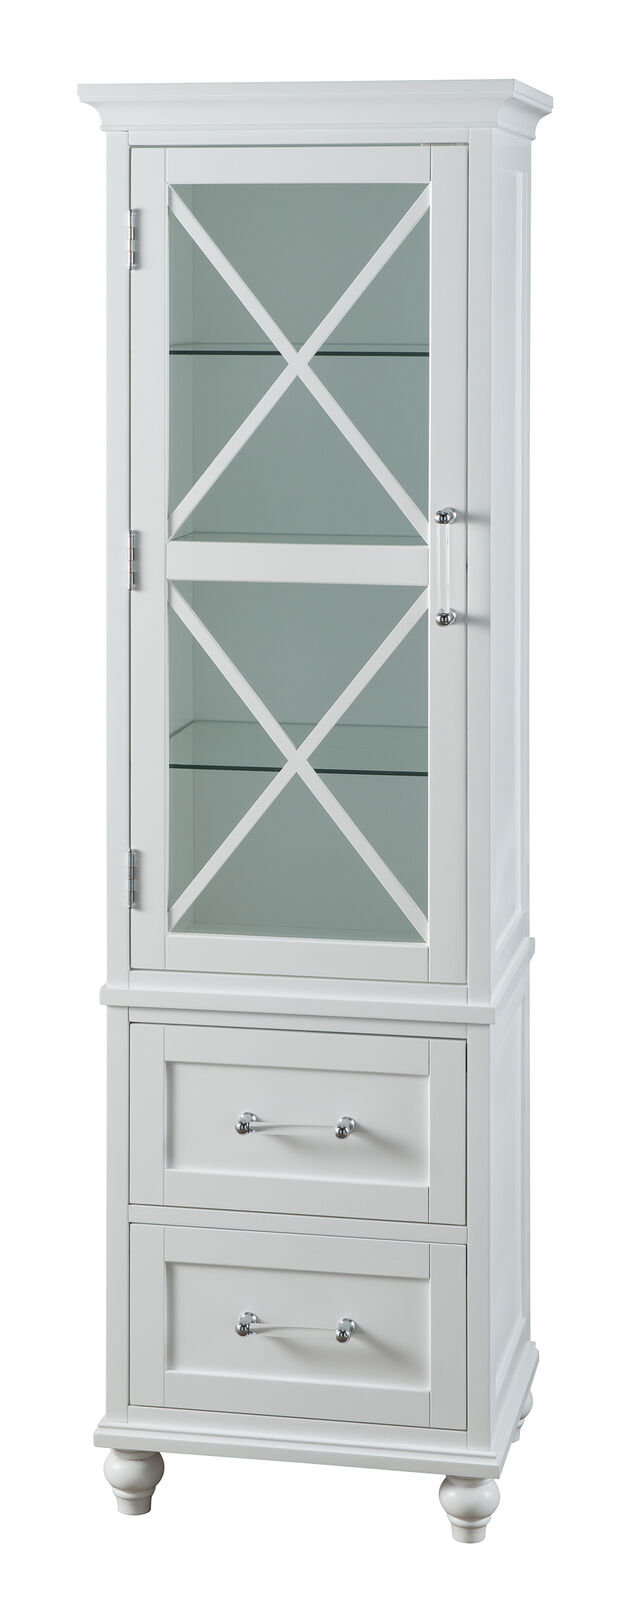 Teamson Home Blue Ridge Wooden Linen Tower Cabinet with Adjustable Shelves White